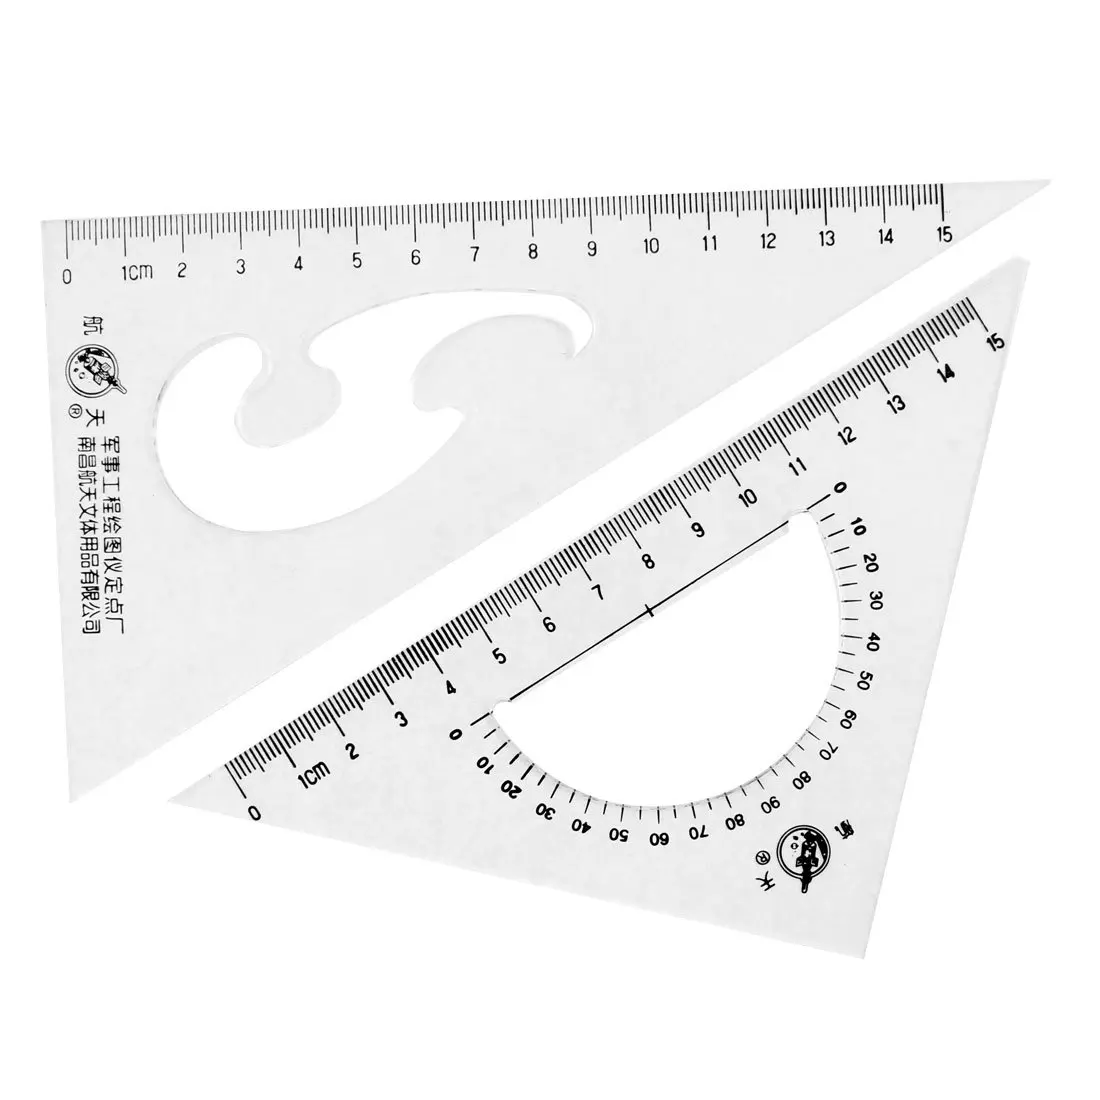 Cheap Drafting Protractor, find Drafting Protractor deals on line at ...